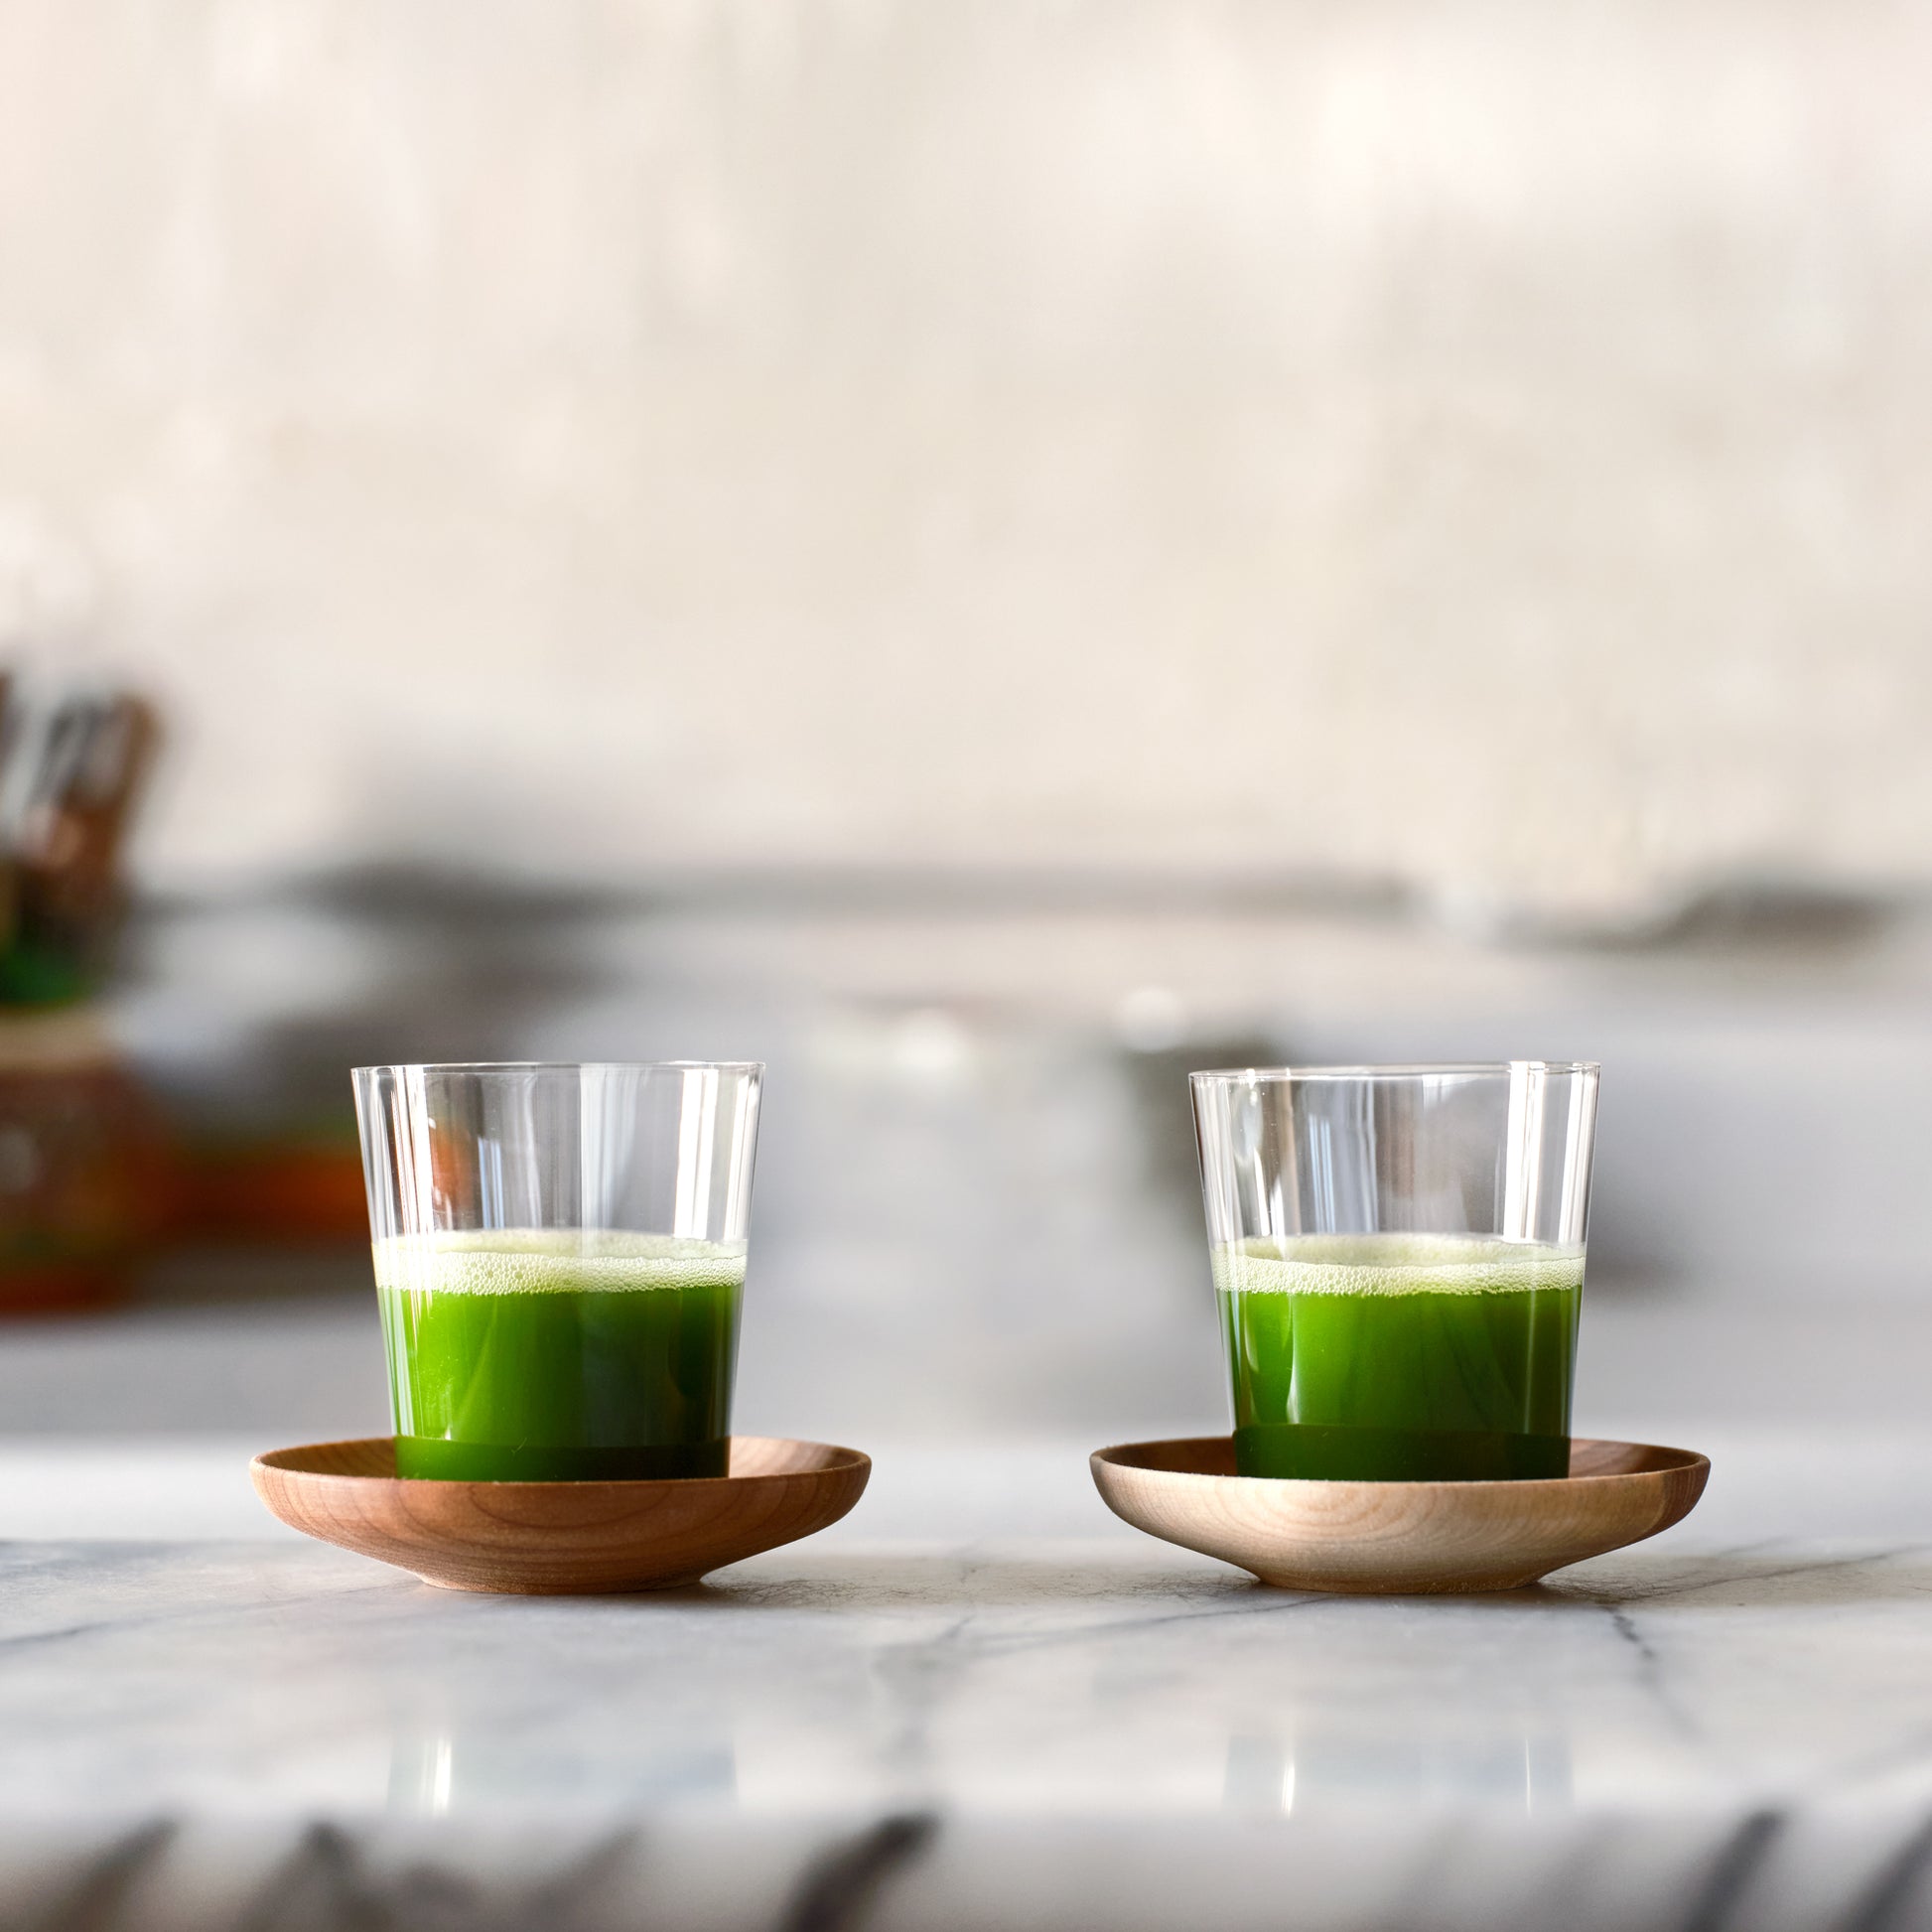 2 sets of Matcha Shot Glasses and Wooden Saucers, side-by-side, full of bright green matcha shots.